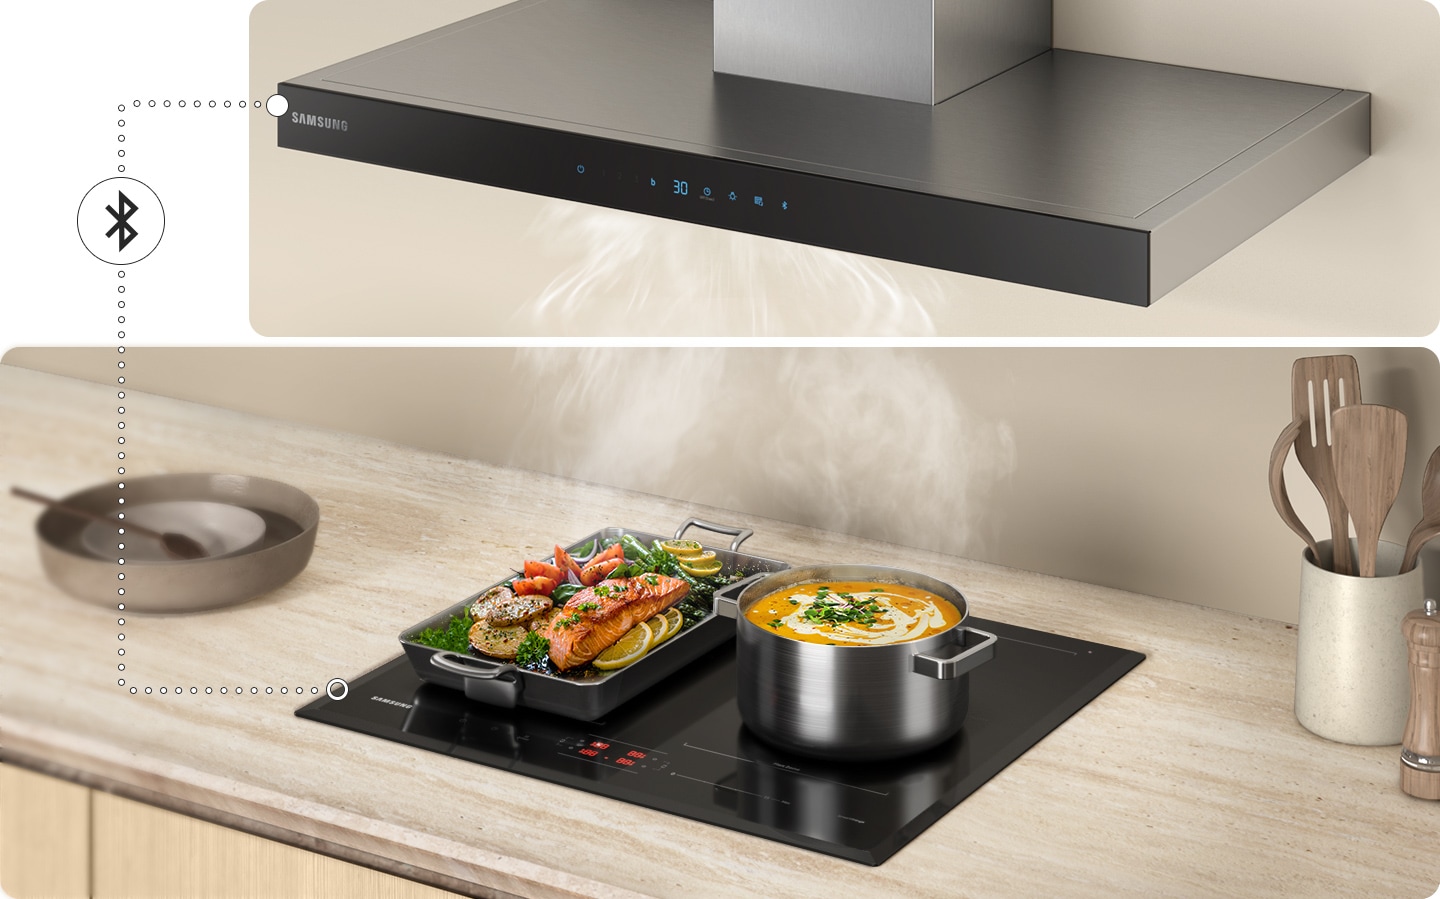 You can control the hood and cooktop at once by connecting them via Bluetooth.